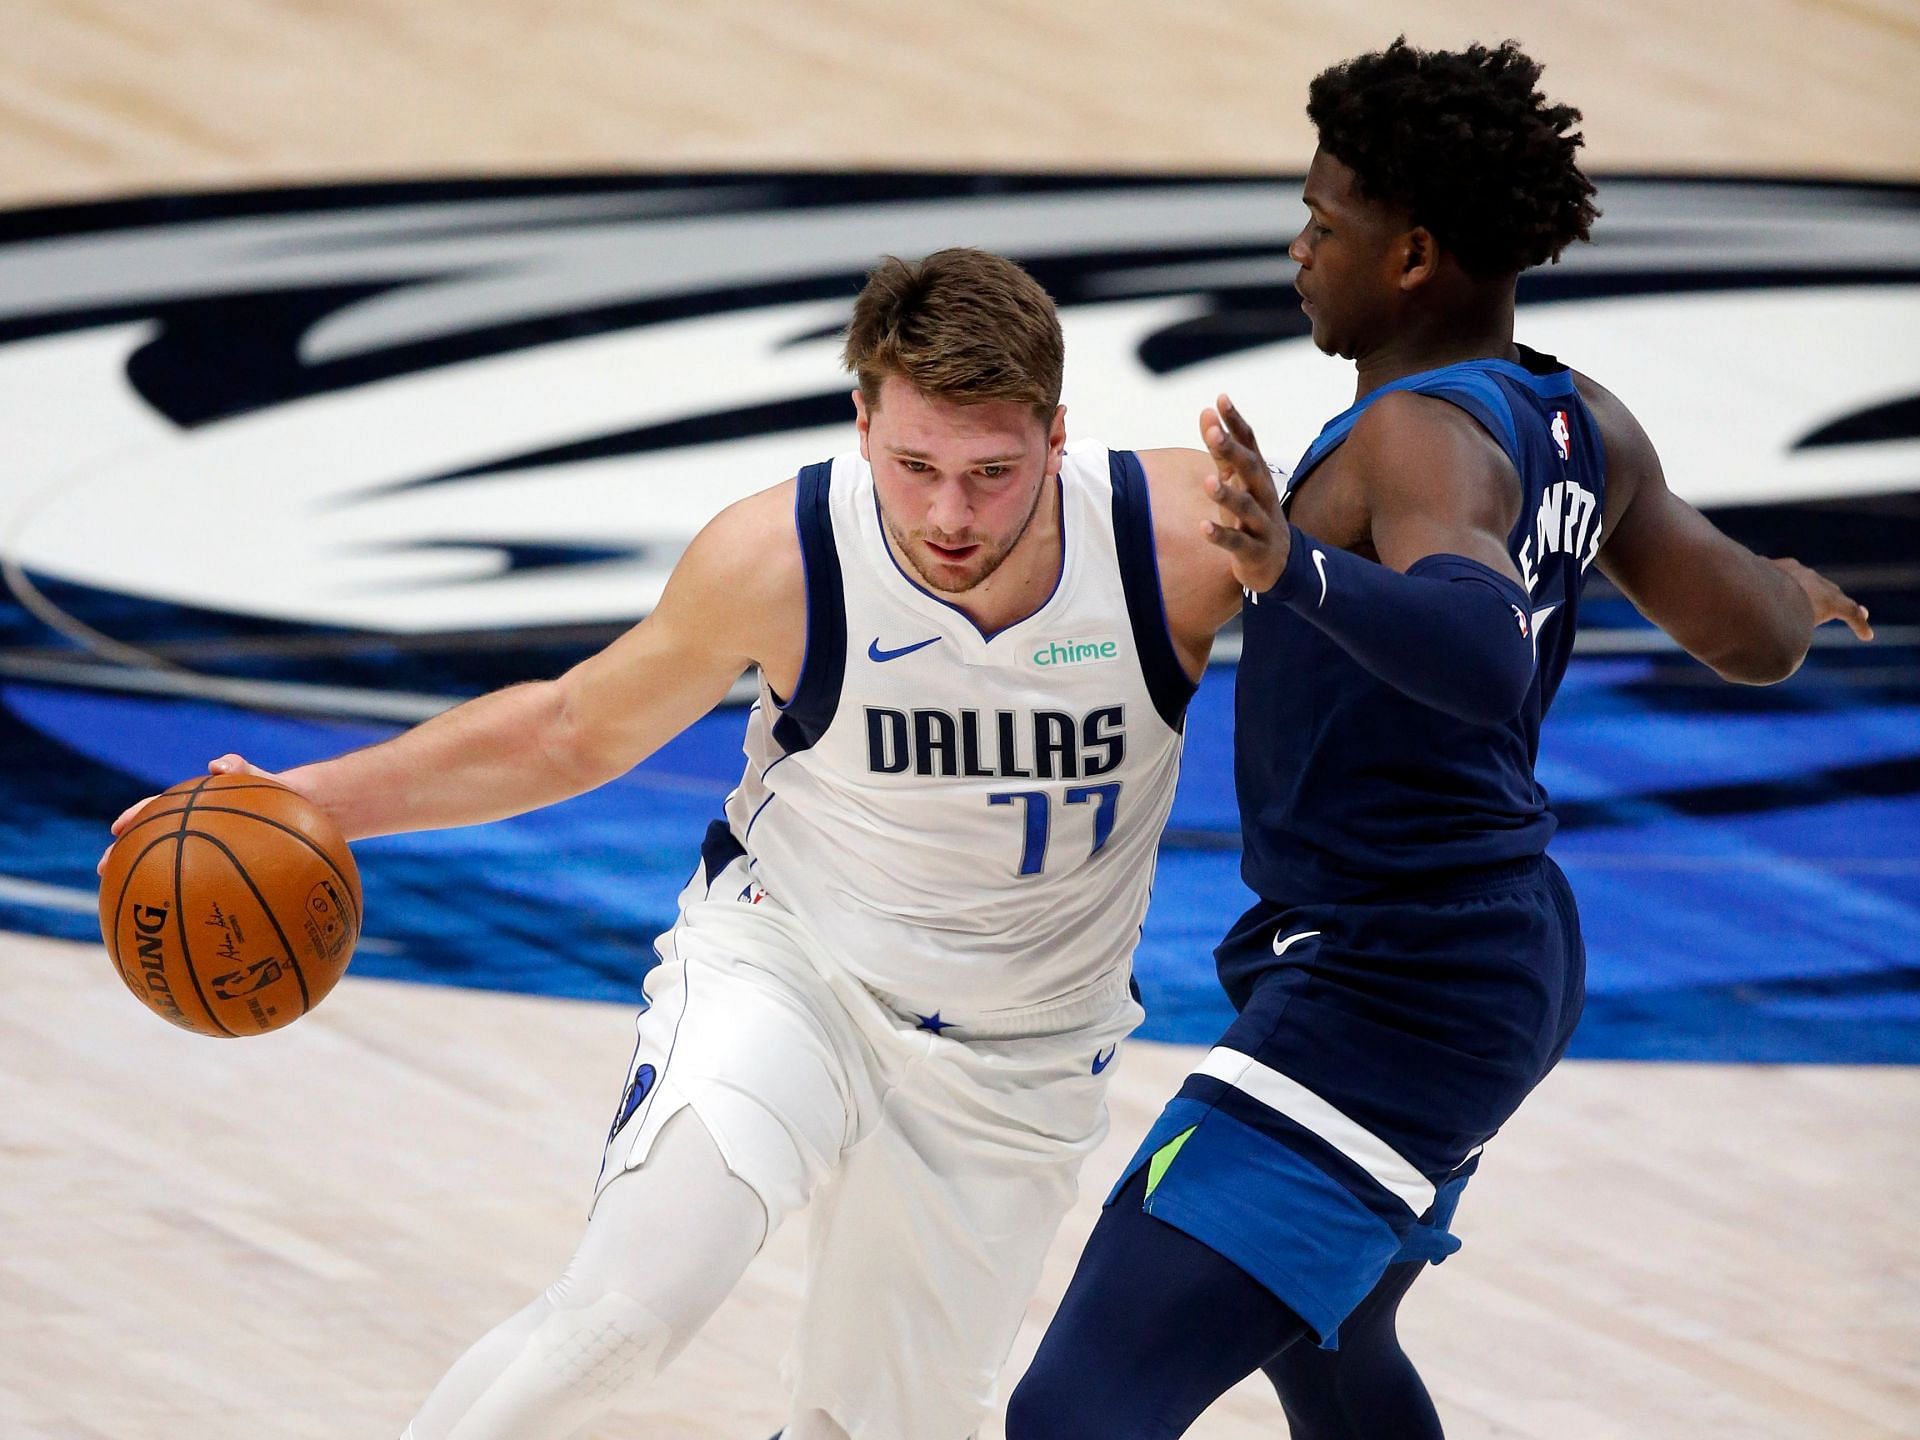 The Dallas Mavericks will host the hottest team in the NBA in the last 10 games, the Minnesota Timberwolves. [Photo: Dallas Morning News]